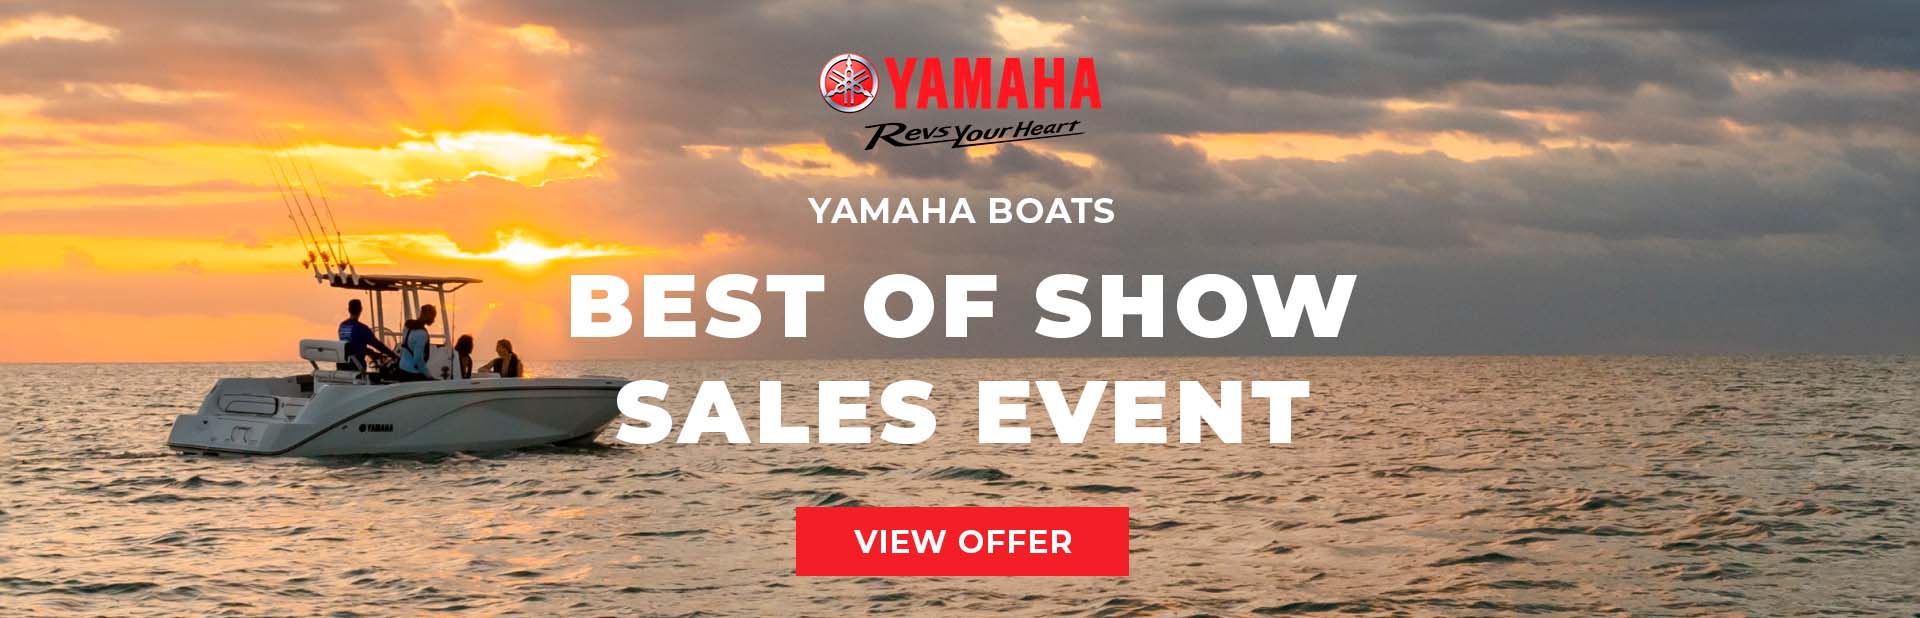 BEST OF SHOW SALES EVENT